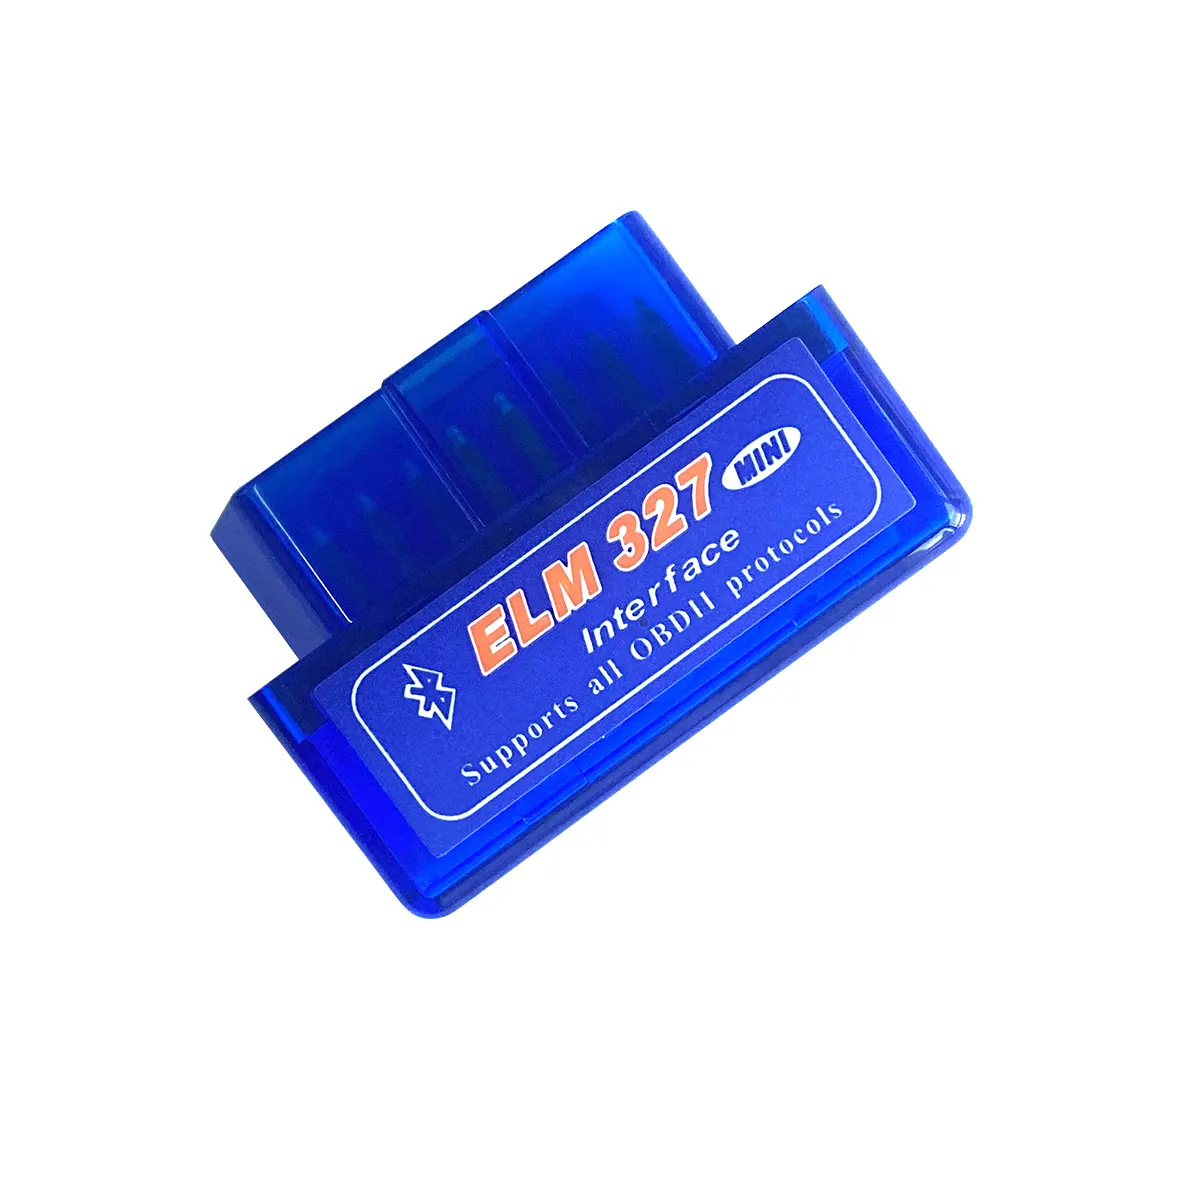 Cheapest Mini Elm327 Bluetooth4.0 Interface OBD II for ios android Code Reader OBD2 Car Scanner